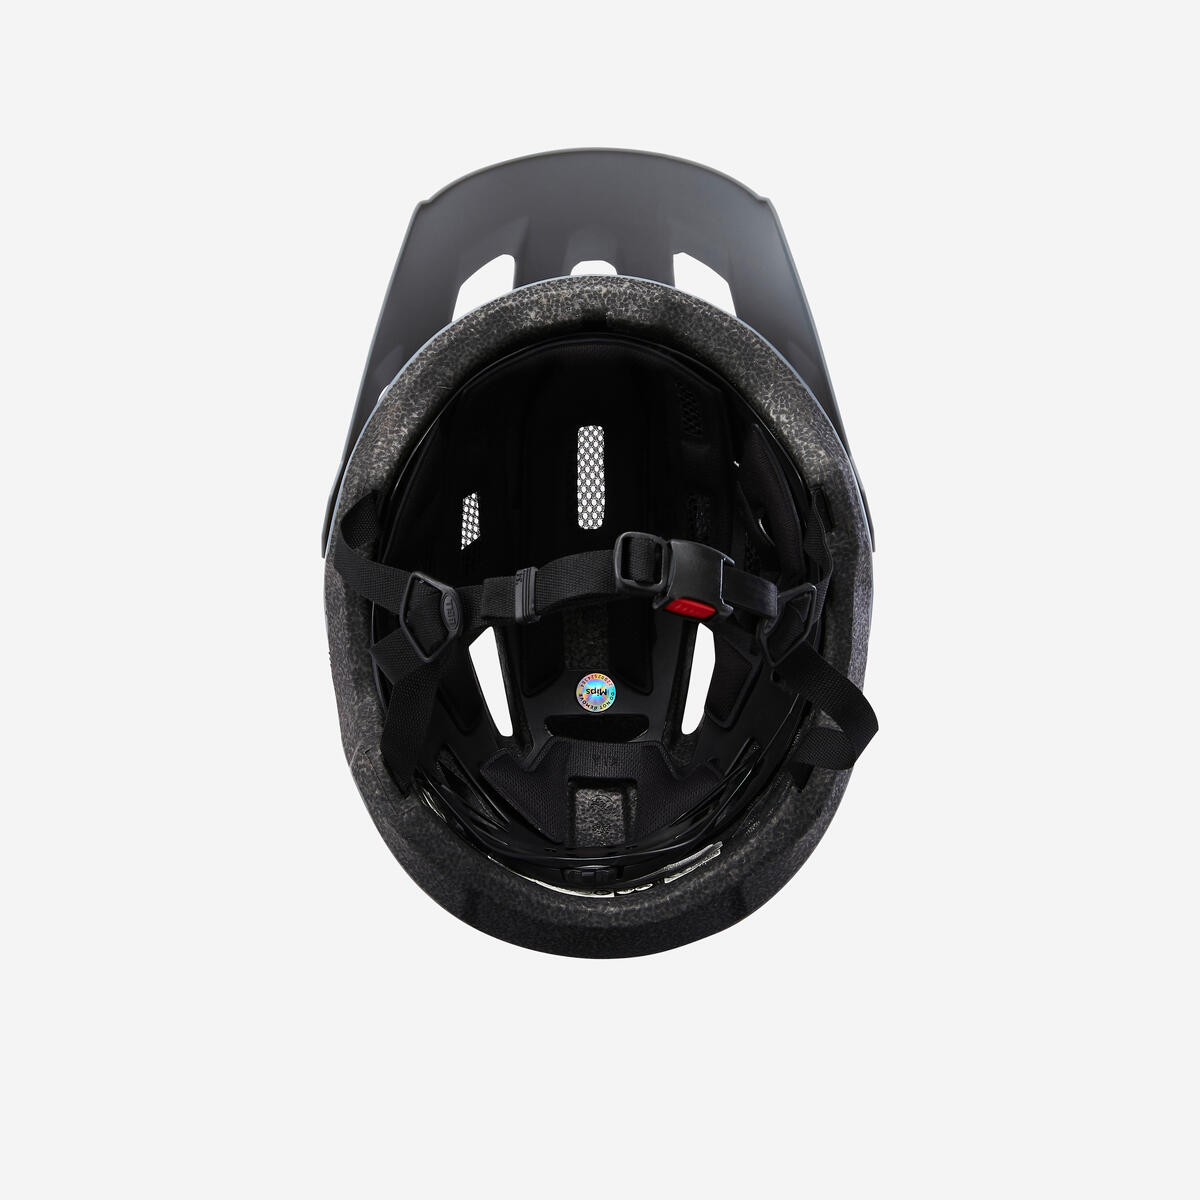 casco-ciclismo-mtb-bell-influx-mips-gris.jpg